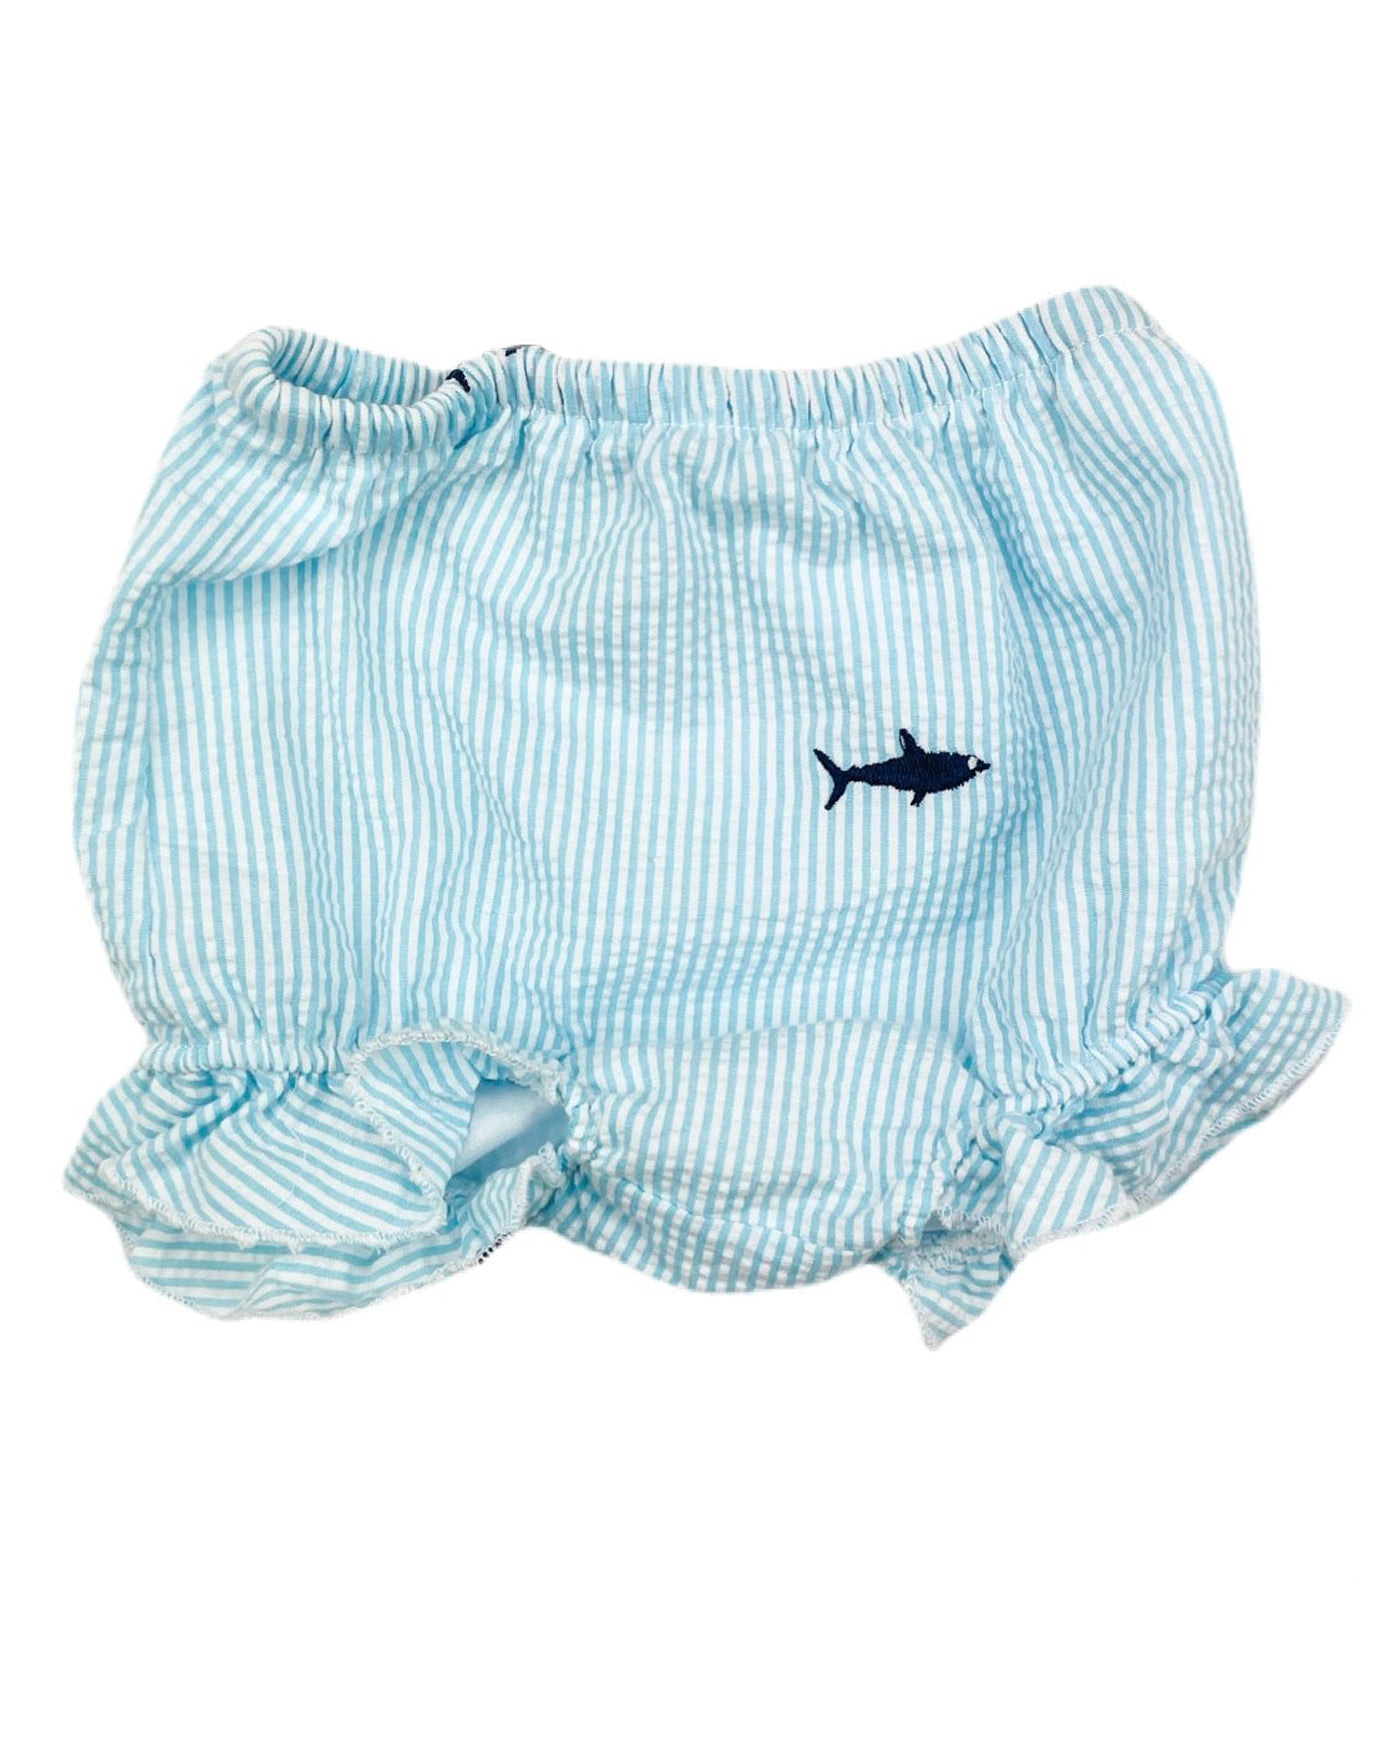 Turquoise Seersucker Baby Bloomers with Navy Embroidered Sharks